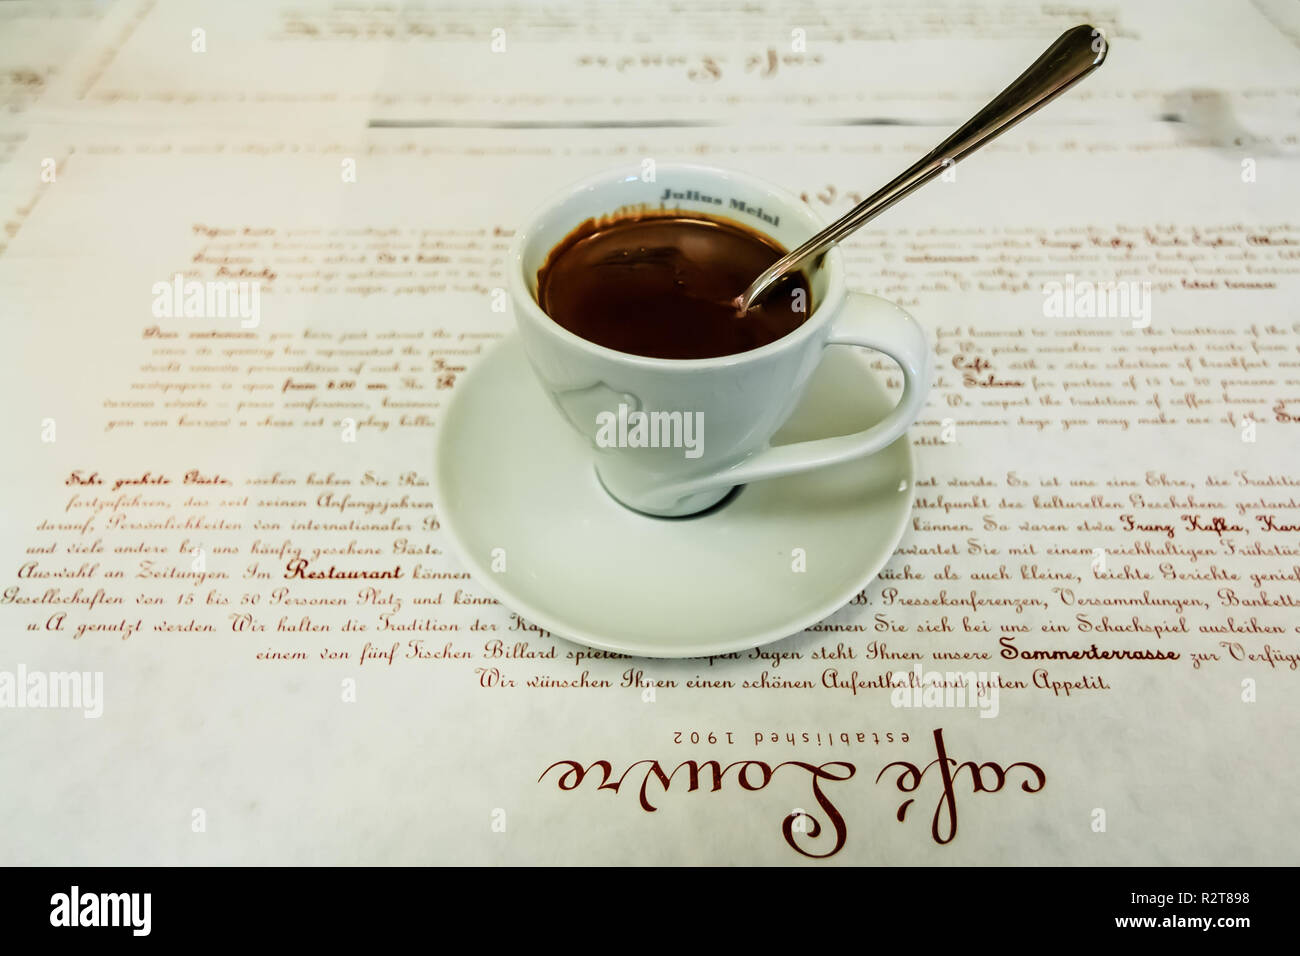 Prague, Czech republic - January 15, 2015: Cup of thick Italian or European style hot chocolate at the famous Café Louvre Stock Photo